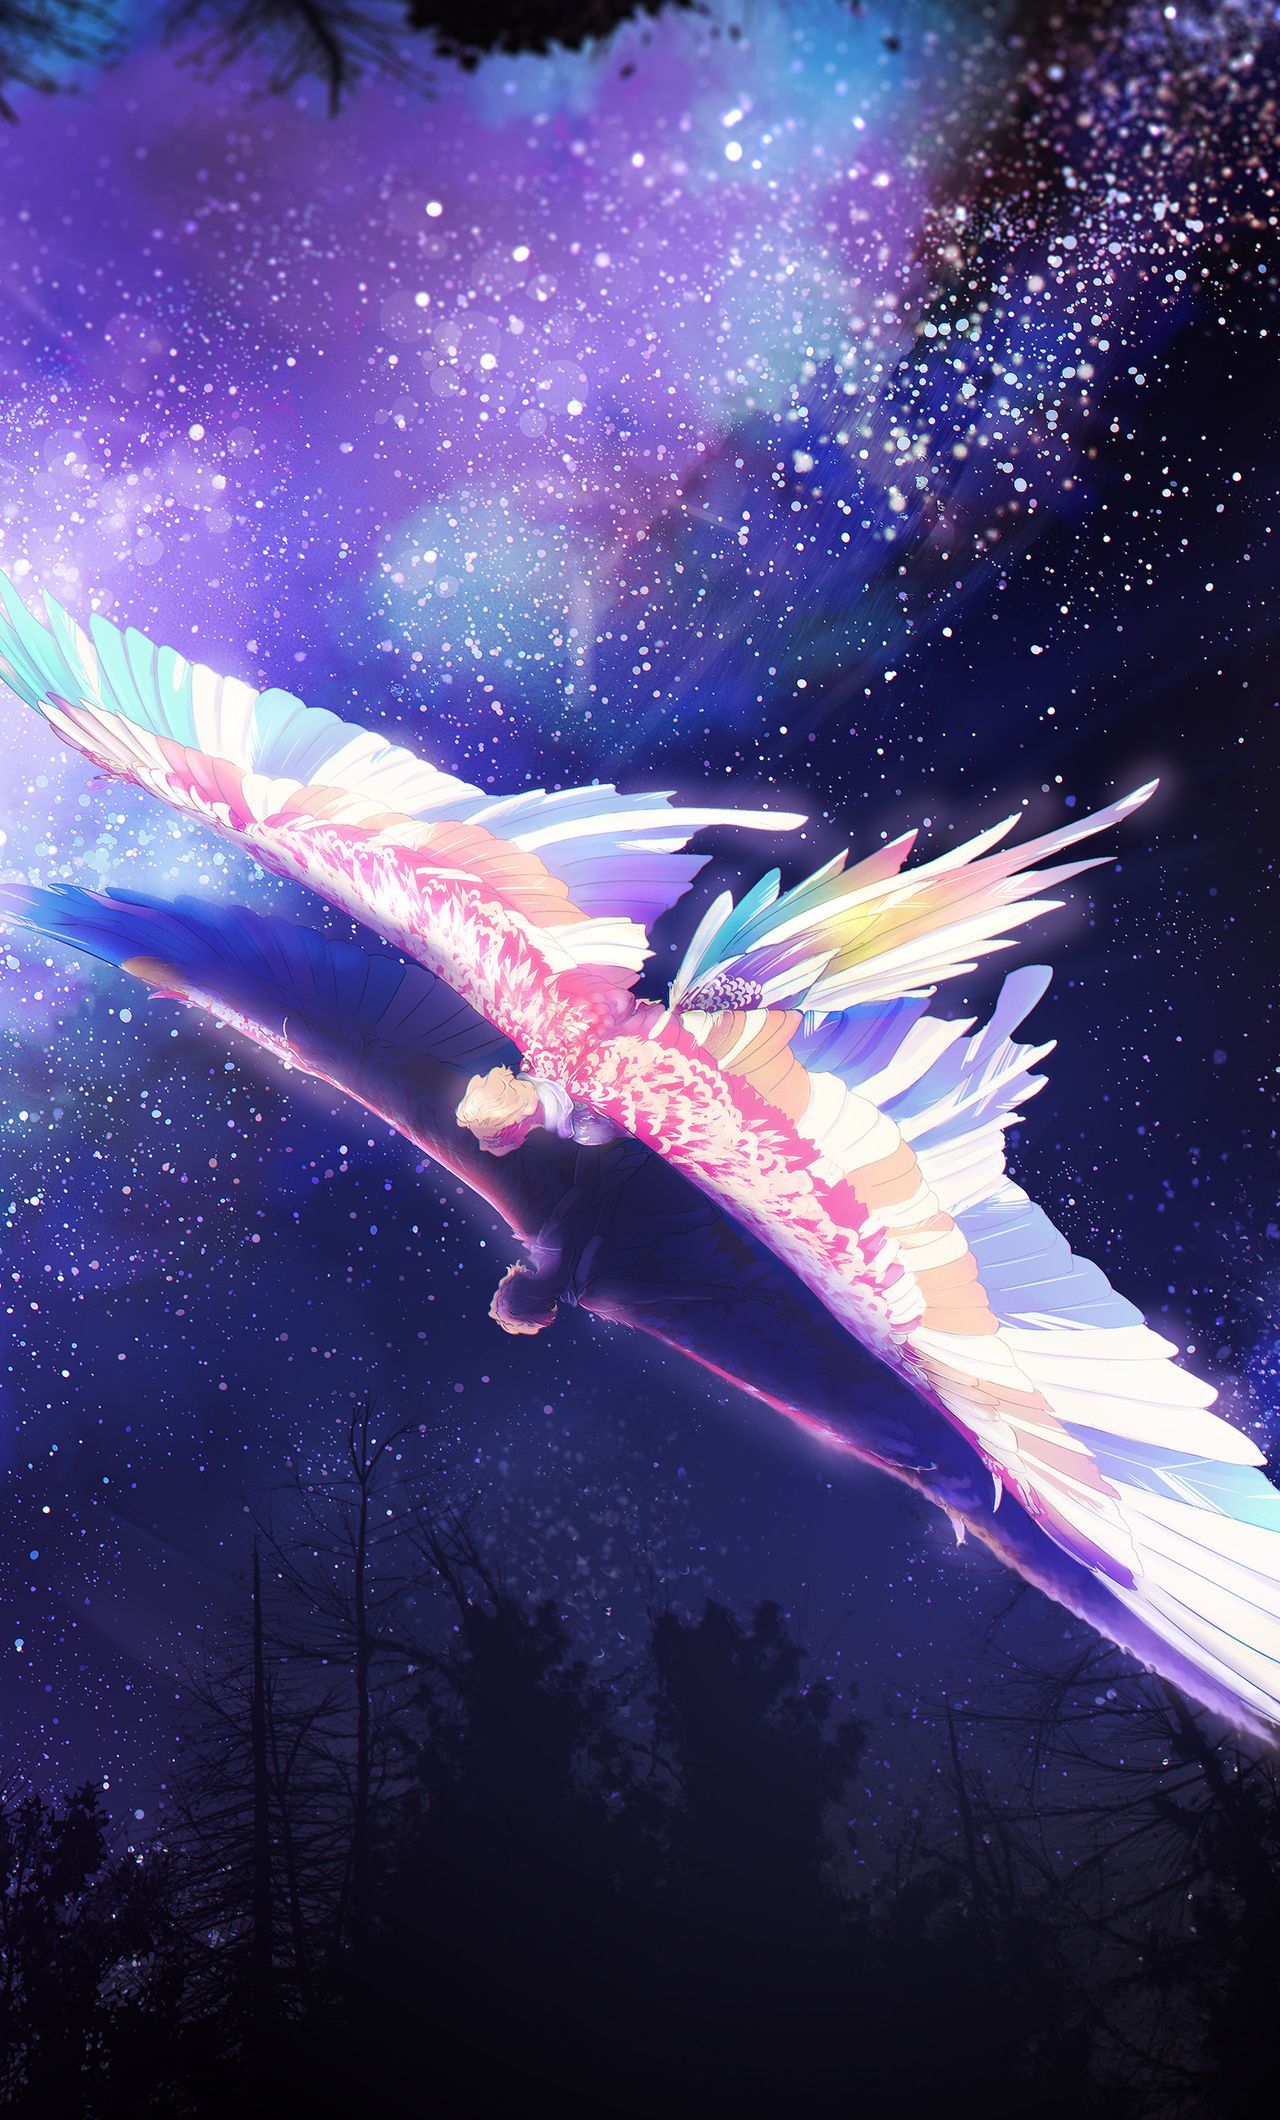 A colorful bird flying in the sky - Wings